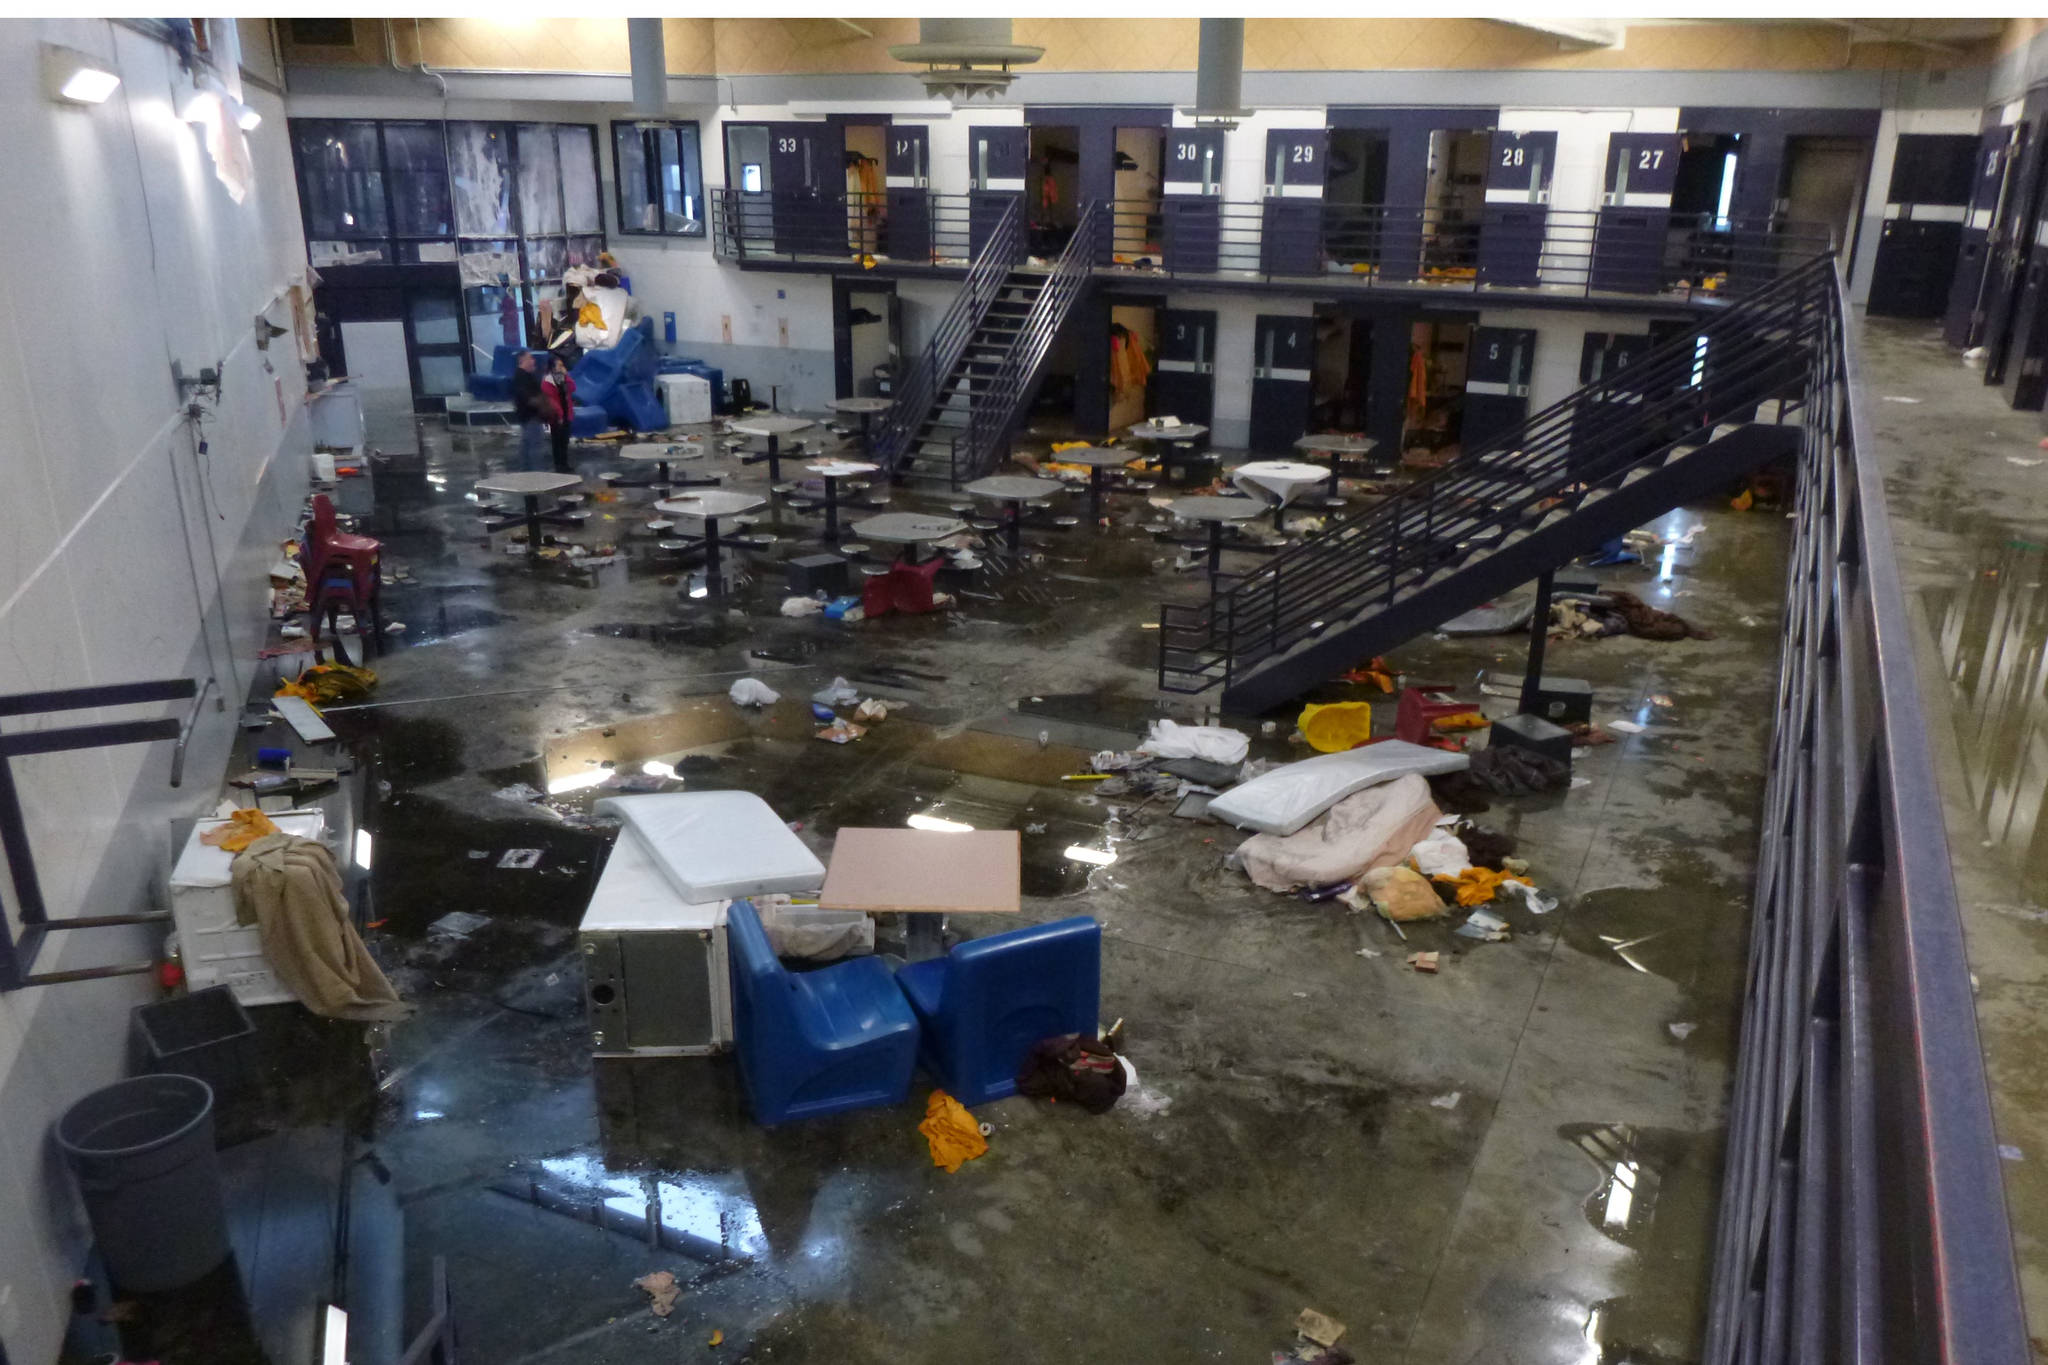 The Hotel Mod Housing Unit at Spring Creek Correctional Facility as seen after an overnight riot took place on Wednesday, May 8, 2019. (Photo courtesy Sarah Gallagher/DOC)